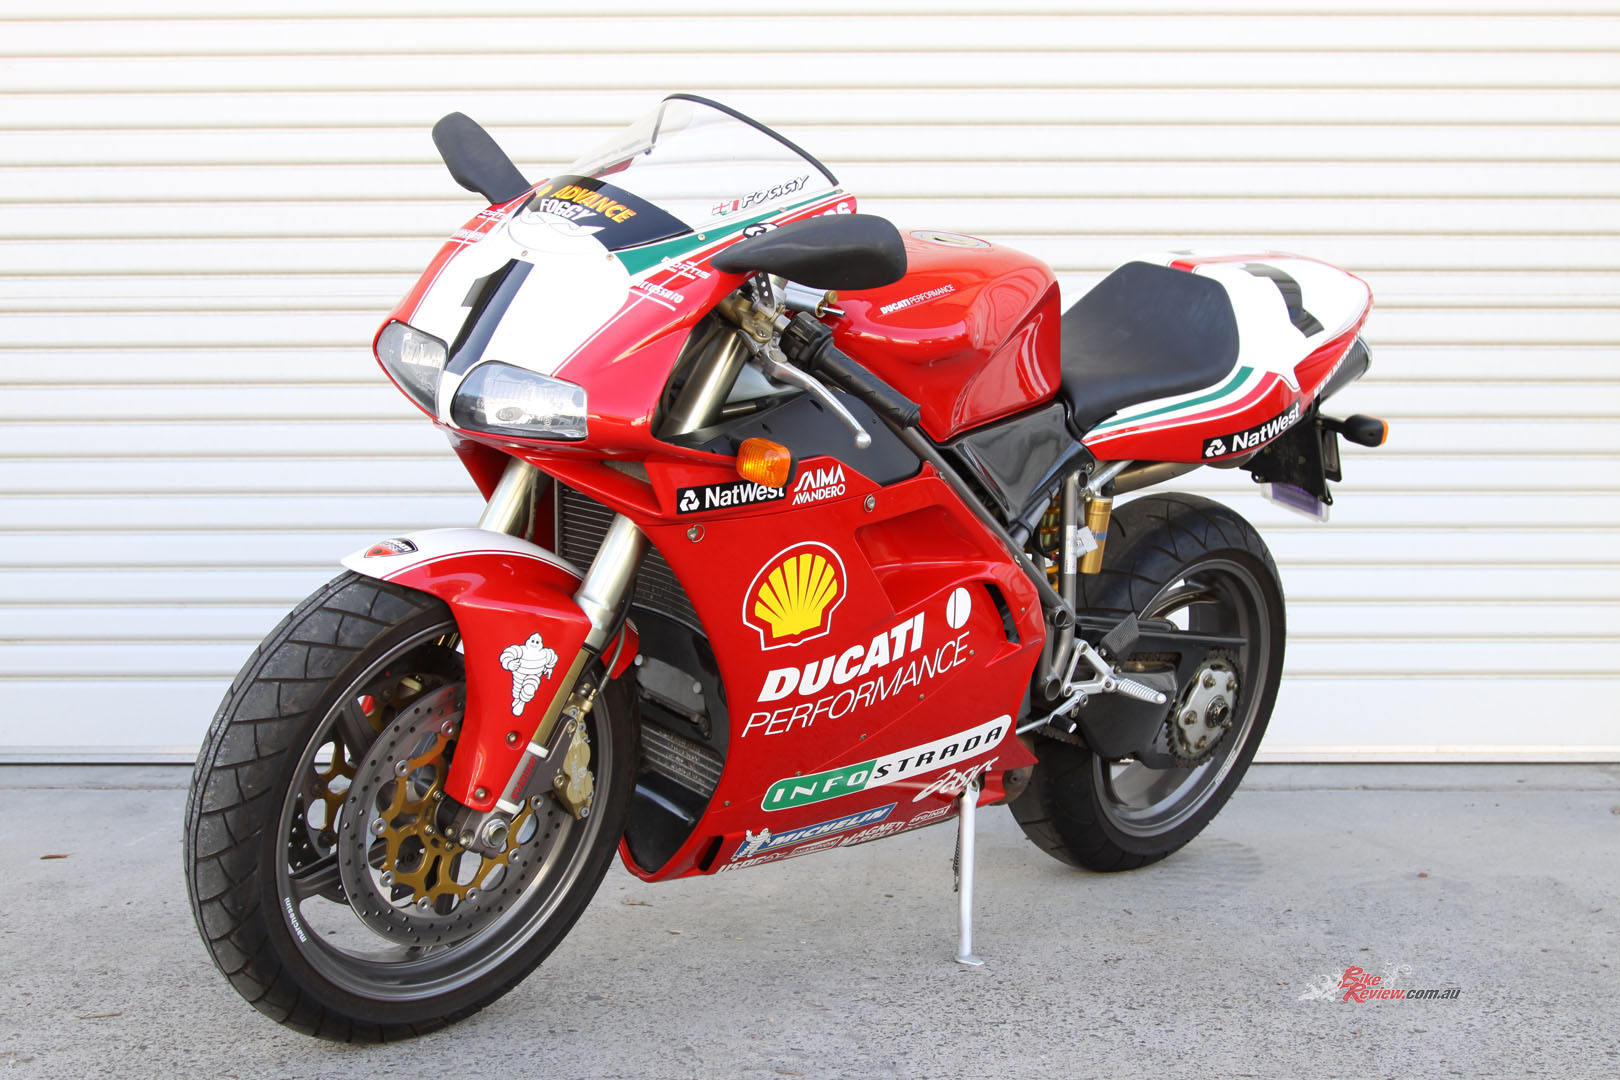 This Ducati 996 Foggy was bought brand new in 1999 for $40k AUD.